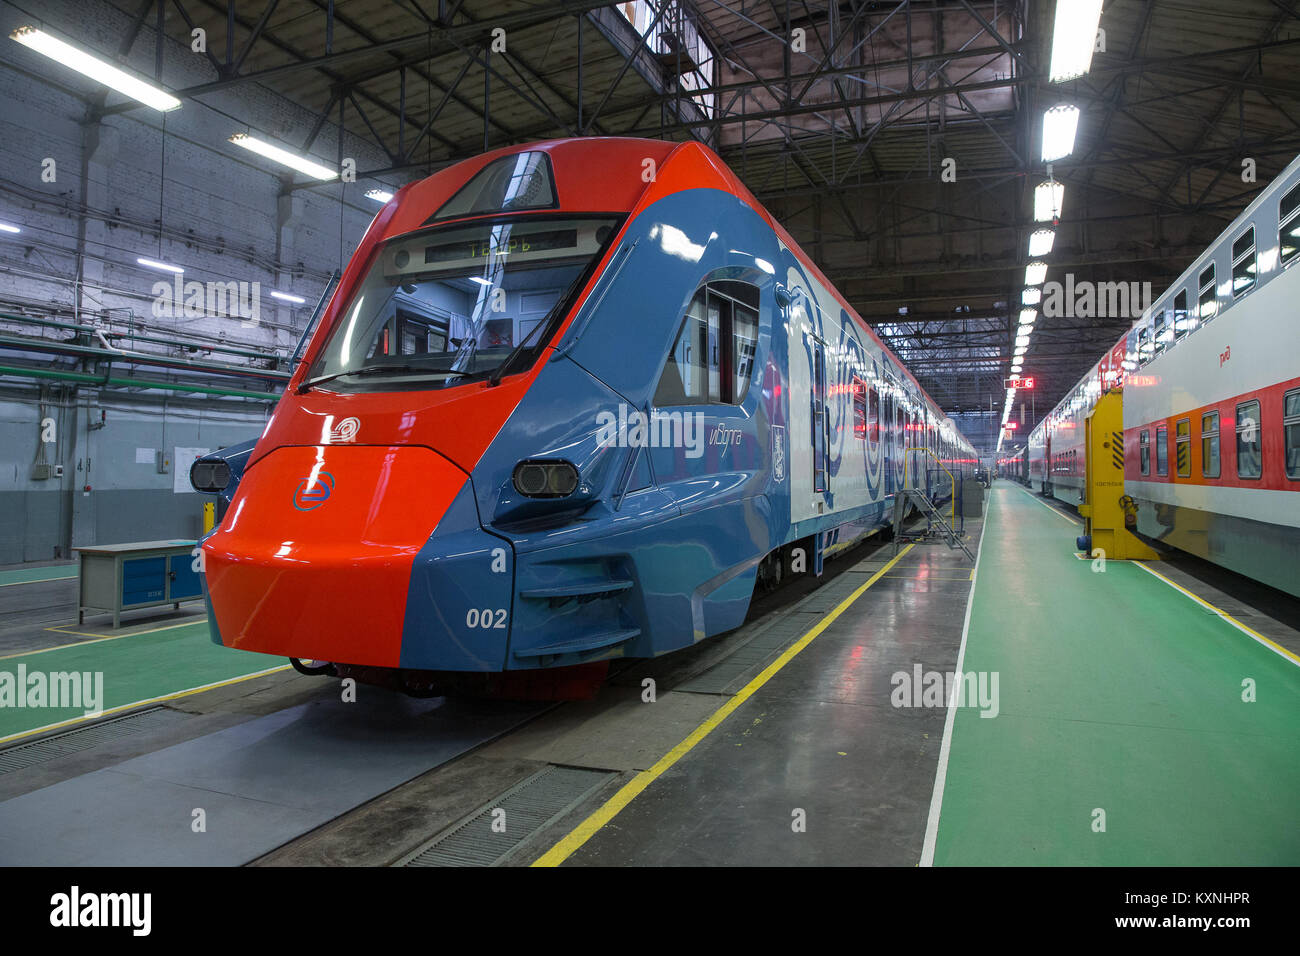 Tver, Russia. 10th Jan, 2018. An Ivolga electric train is seen at the Tver Carriage Works in Tver, Russia, on Jan. 10, 2018. Inflation in Russia hit a record low of 2.5 percent last year, the country's official statistics service Rosstat said Wednesday. The Russian economy is improving and the positive momentum continues, President Vladimir Putin said Wednesday when visiting the railway carriage factory. Credit: Bai Xueqi/Xinhua/Alamy Live News Stock Photo